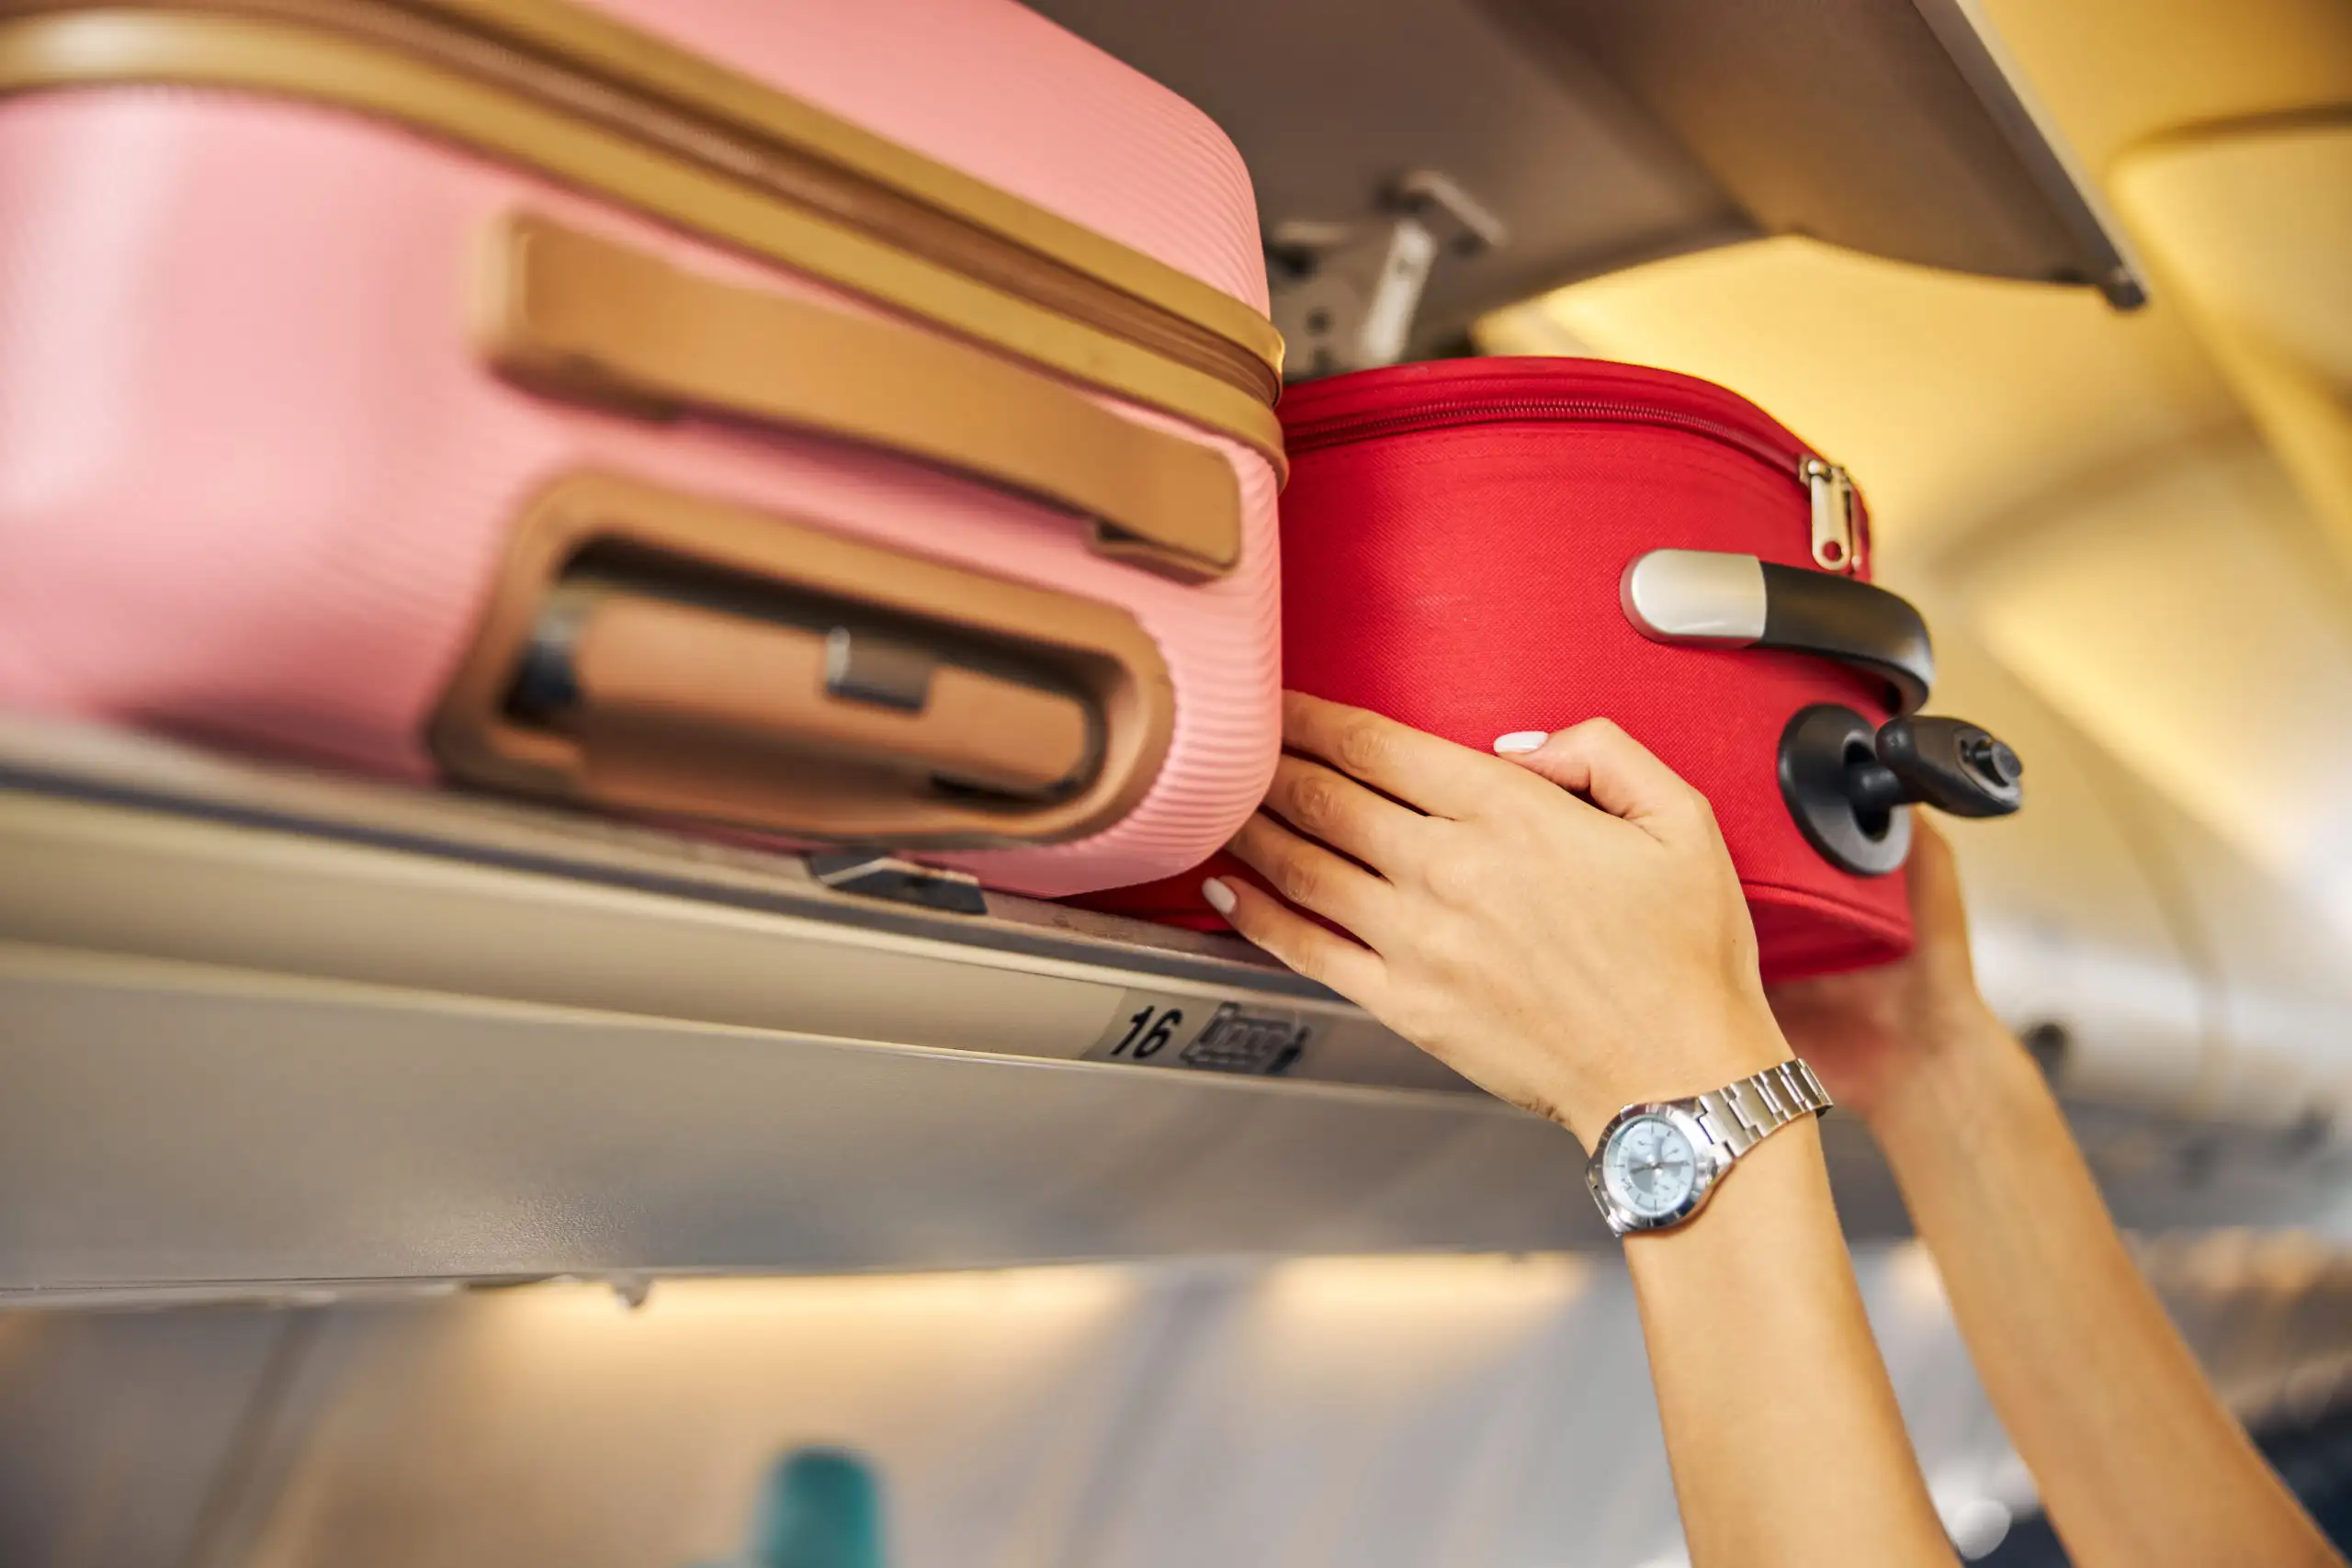 What Not to Pack in Your Carry-on, According to a Professional Packer